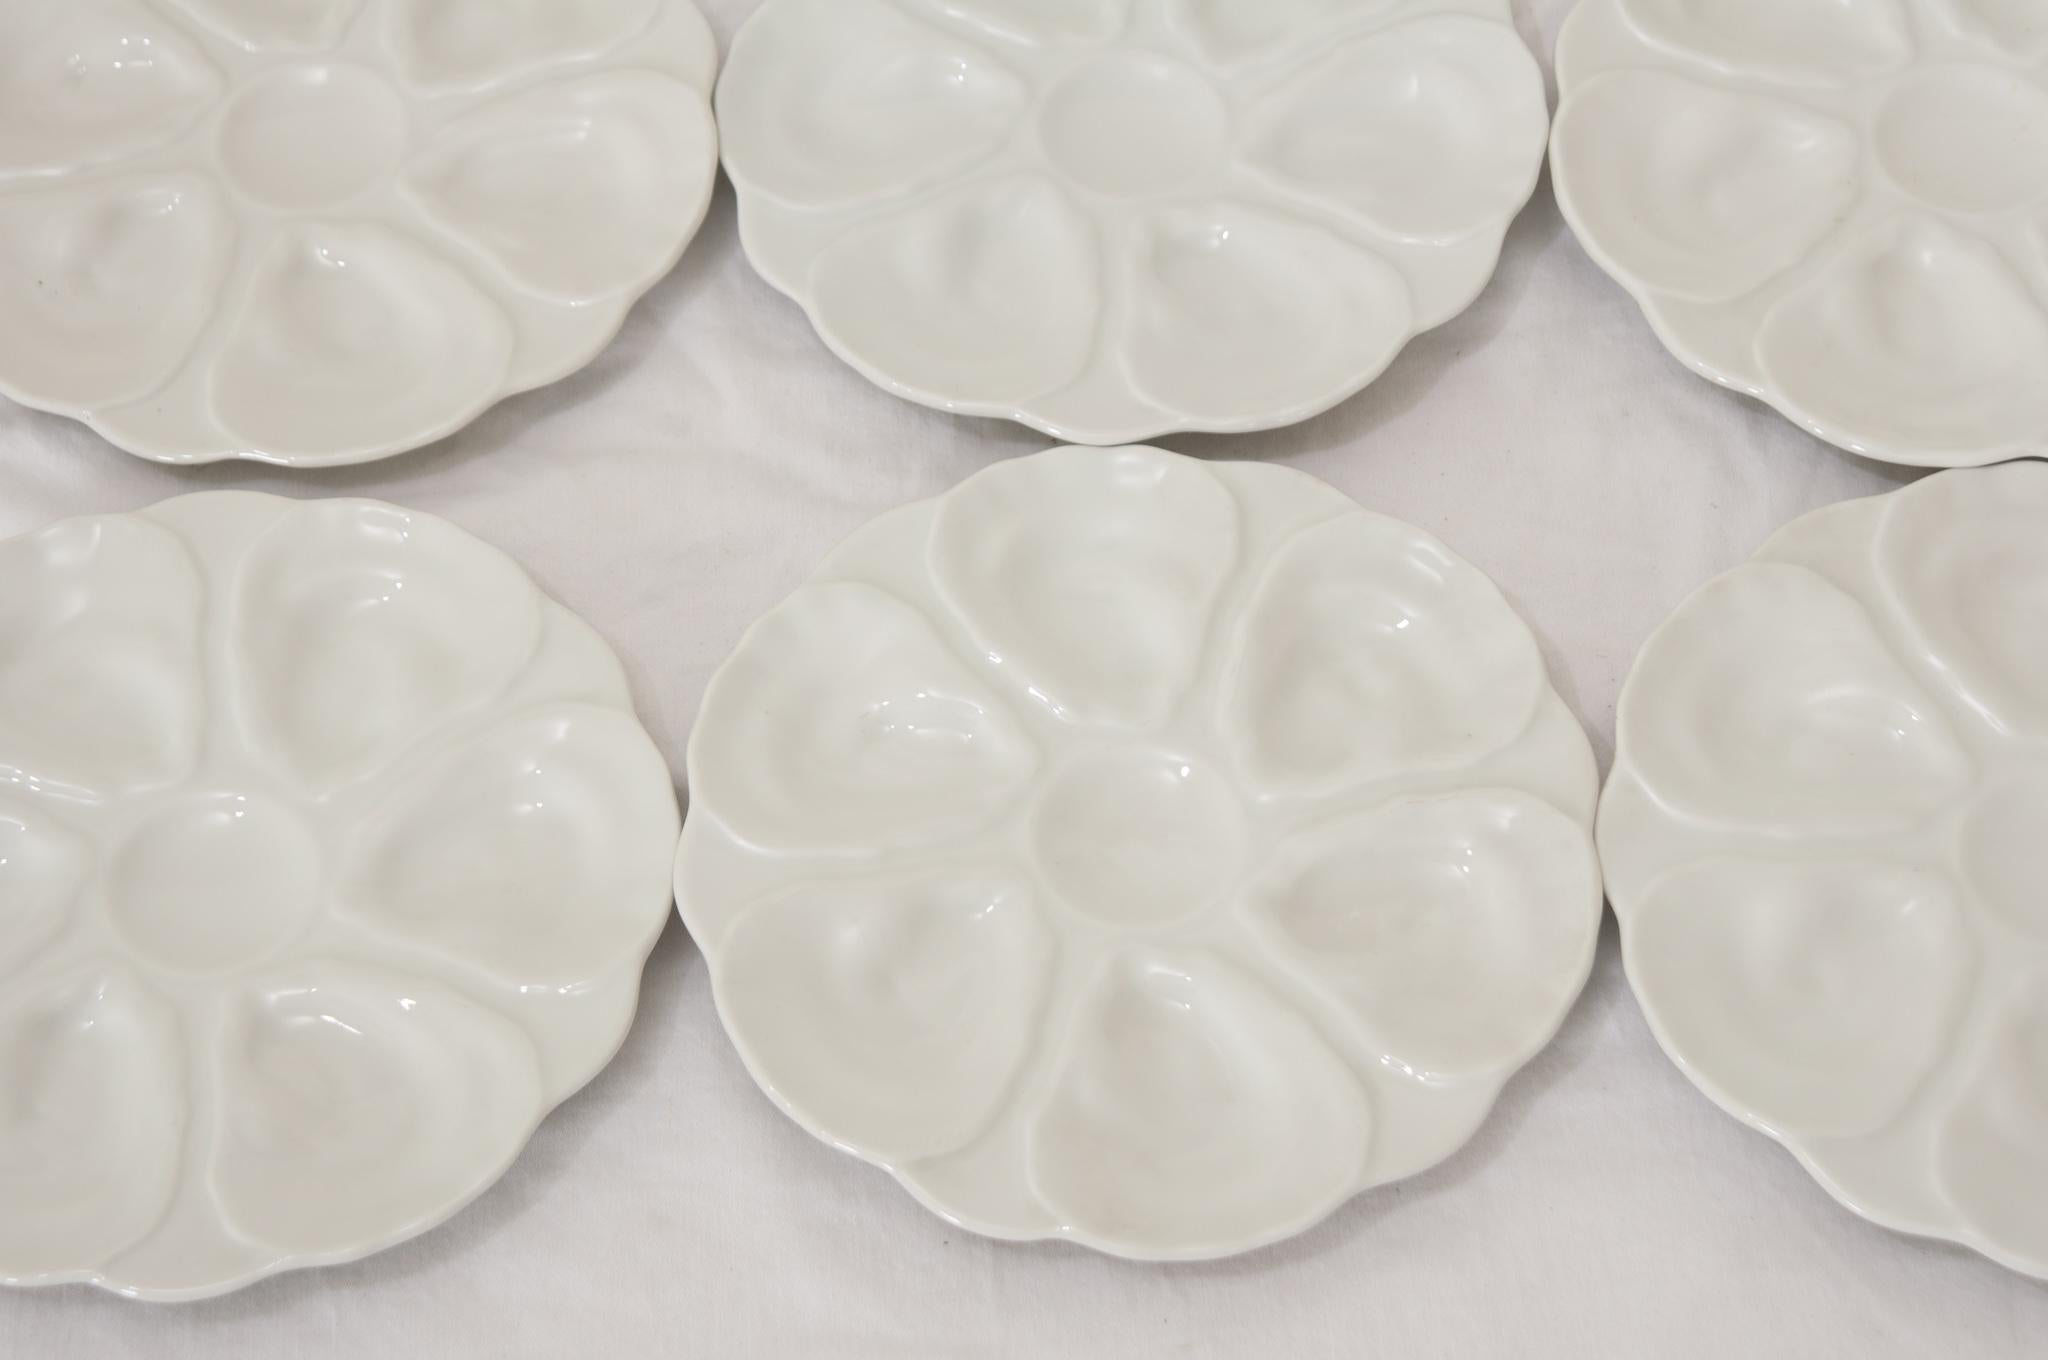 An elegant set of six French white oyster plates with fabulous glossy molded and shaped centers and scalloped edges. This set would be fabulous for serving or used in your interiors. Be sure to view all the images for a better look at these